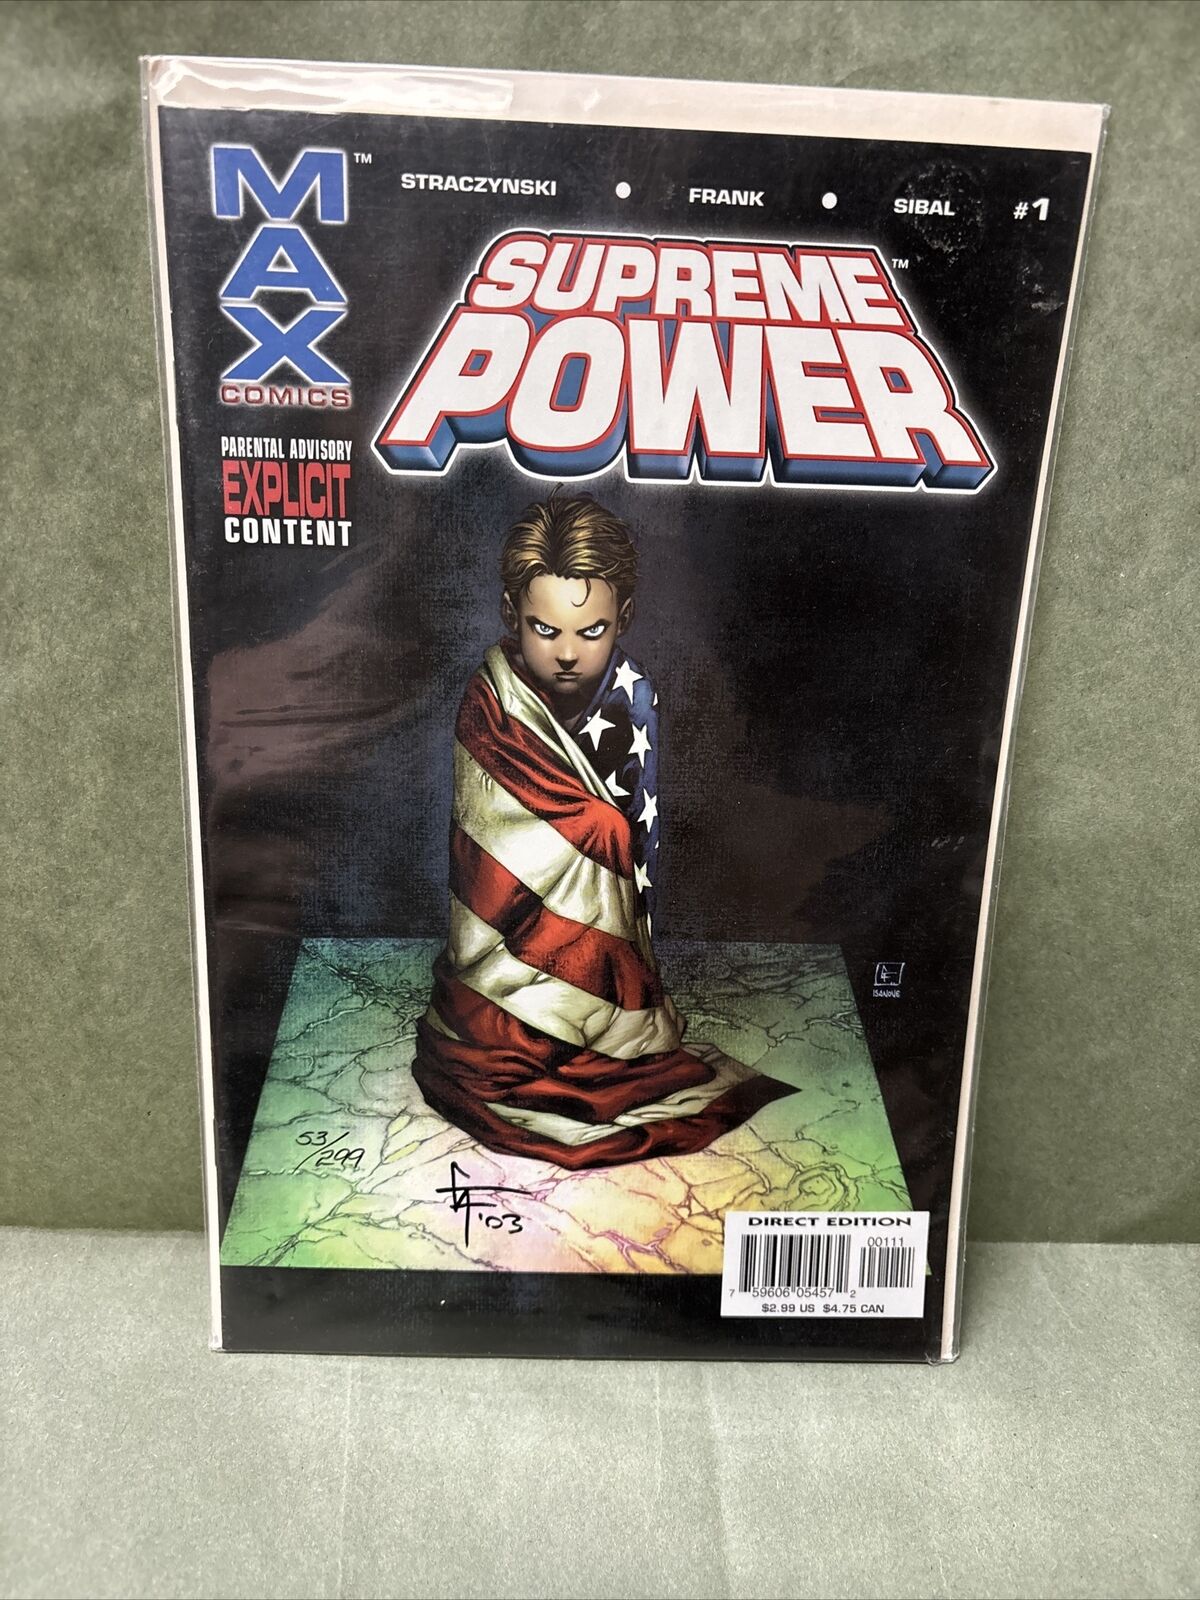 Supreme Power #1 Limited #53 Of 299 Signed By Gary Frank W/COA Sealed In Plastic